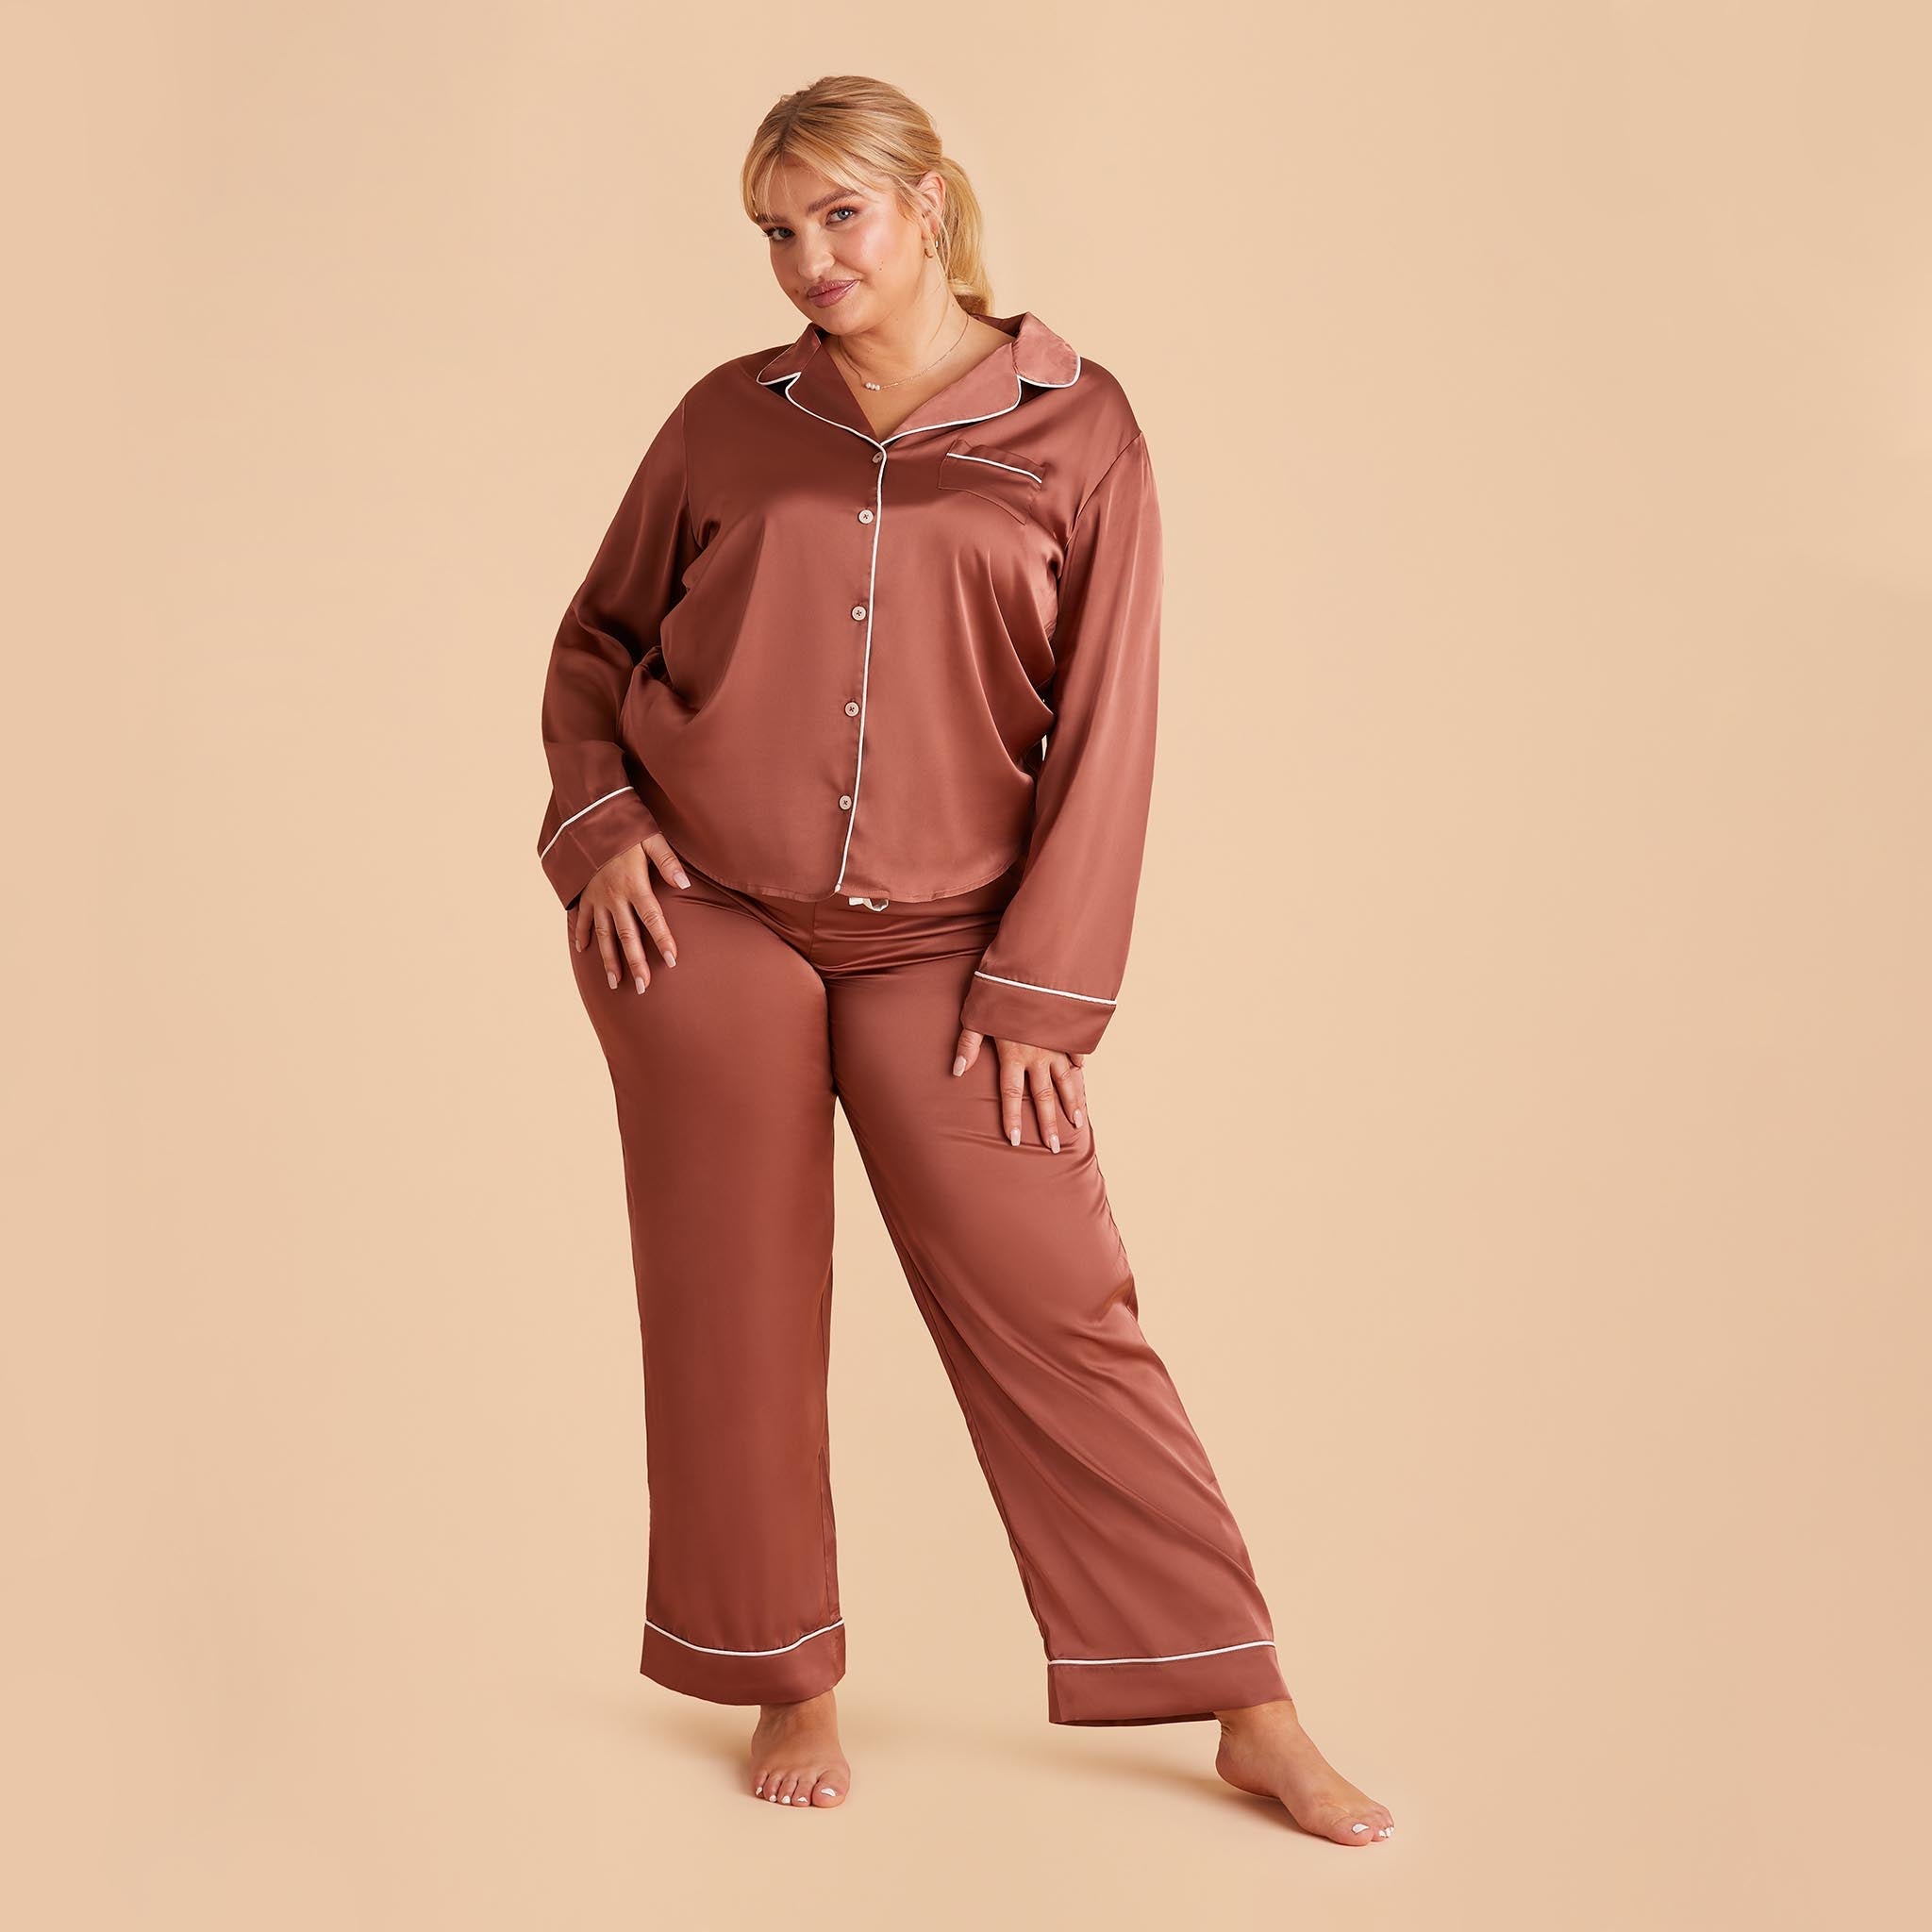 Jonny Plus Size Satin Long Sleeve Pajama Top With White Piping in desert rose, front view